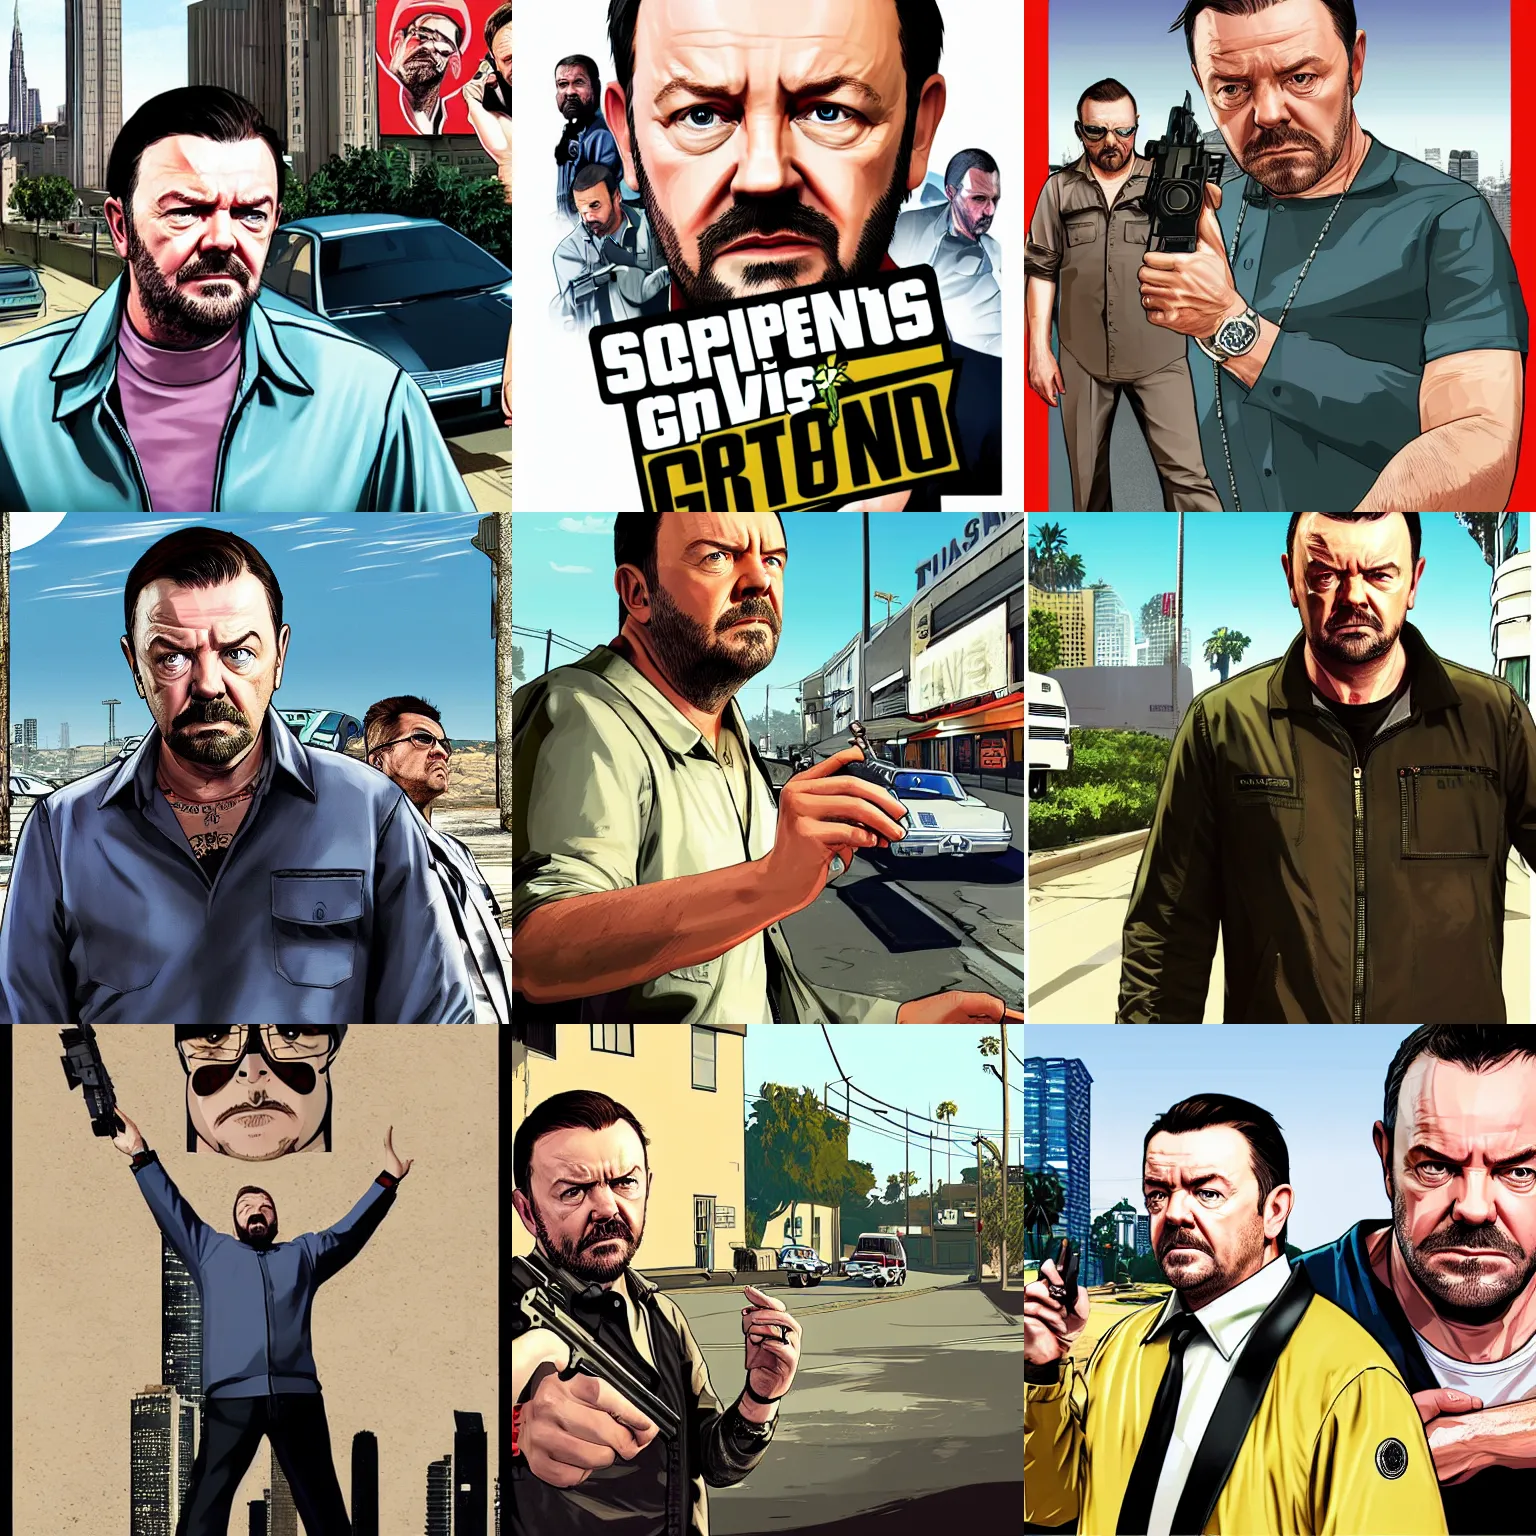 Prompt: ricky gervais in gta v promotional art by stephen bliss, no text, very detailed, professional quality